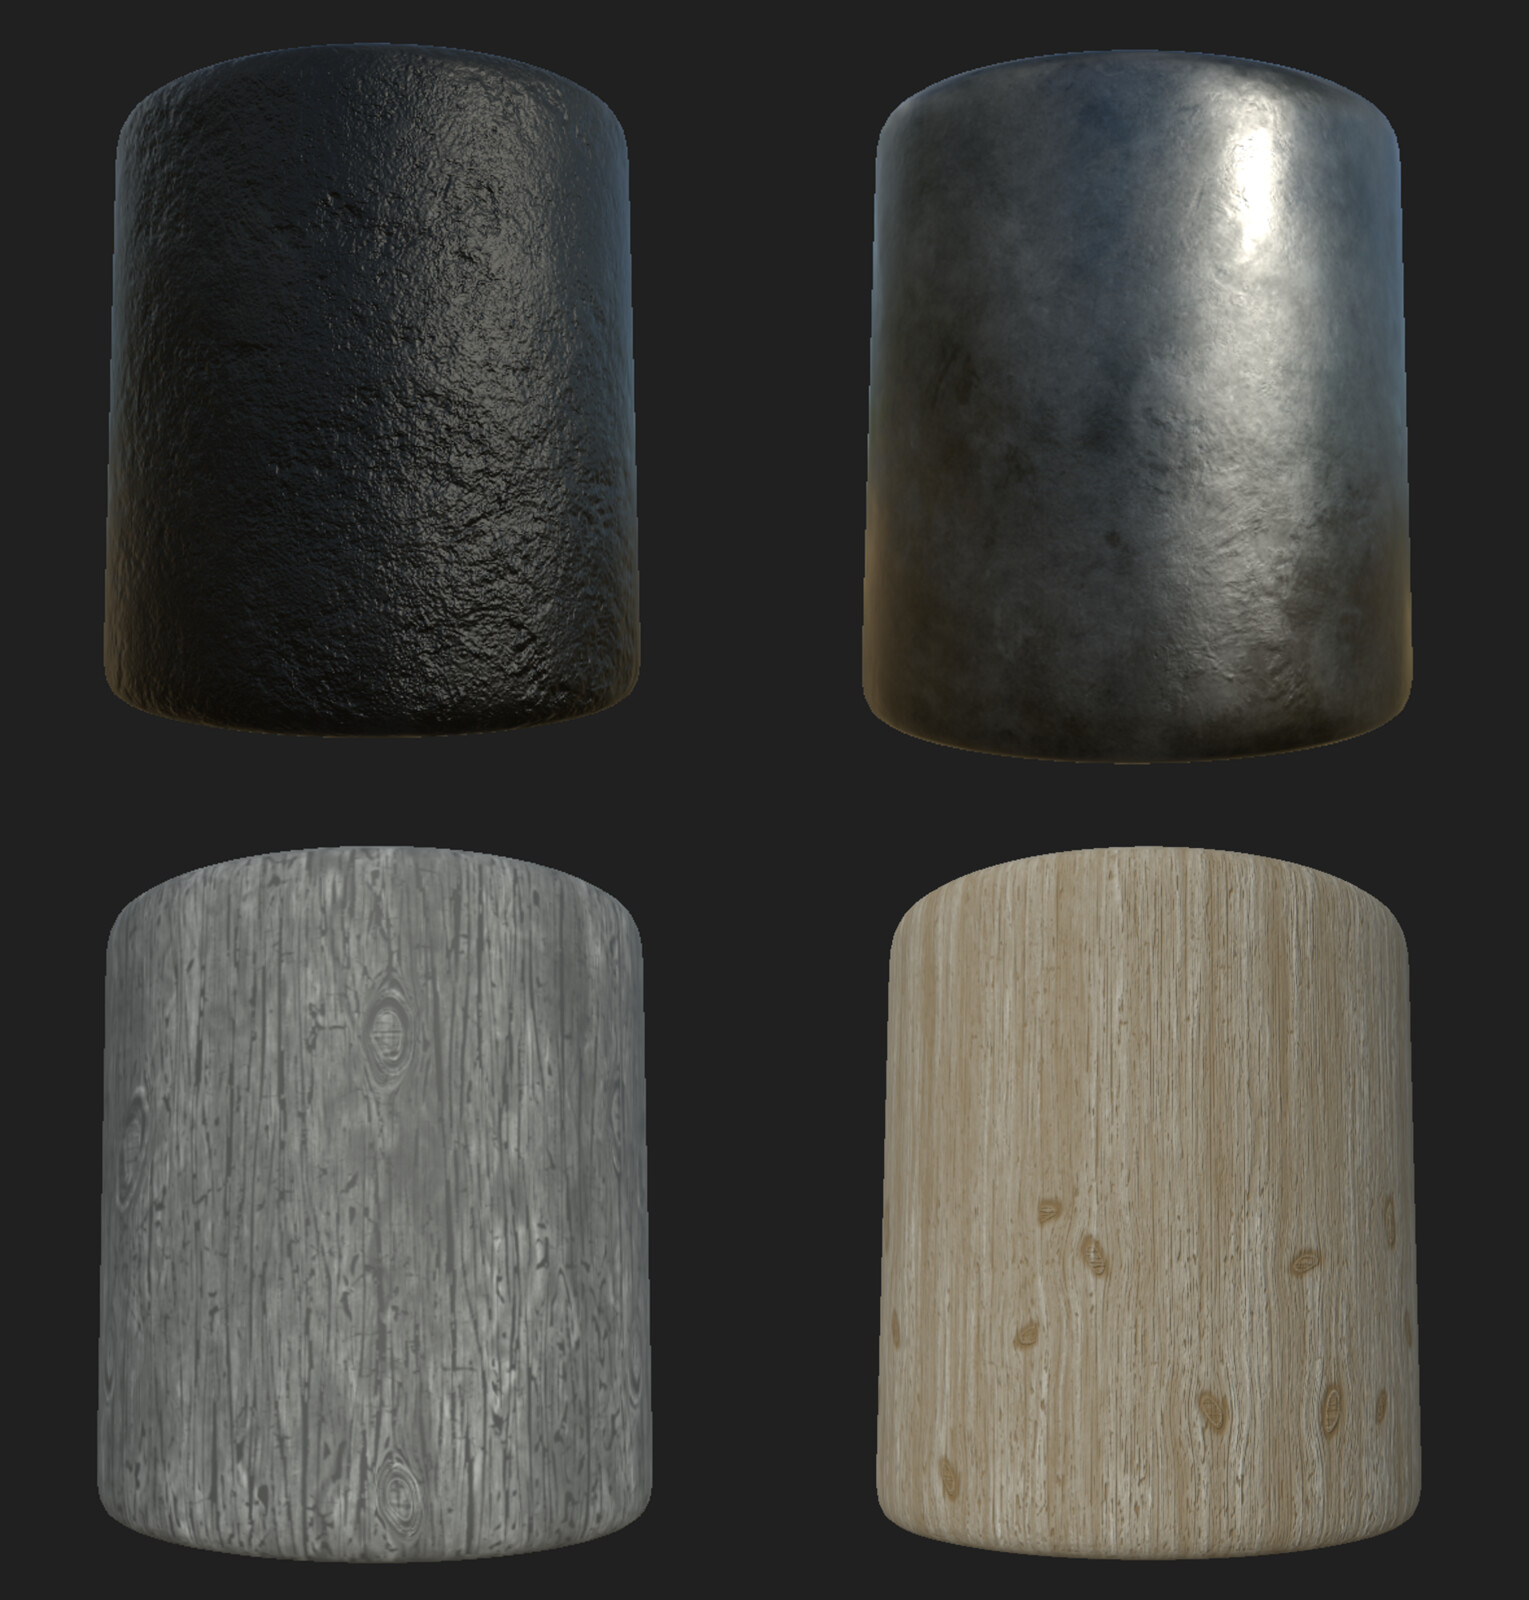 Some of the baseline materials that I used to derive all of my textures from. Made in substance designer.